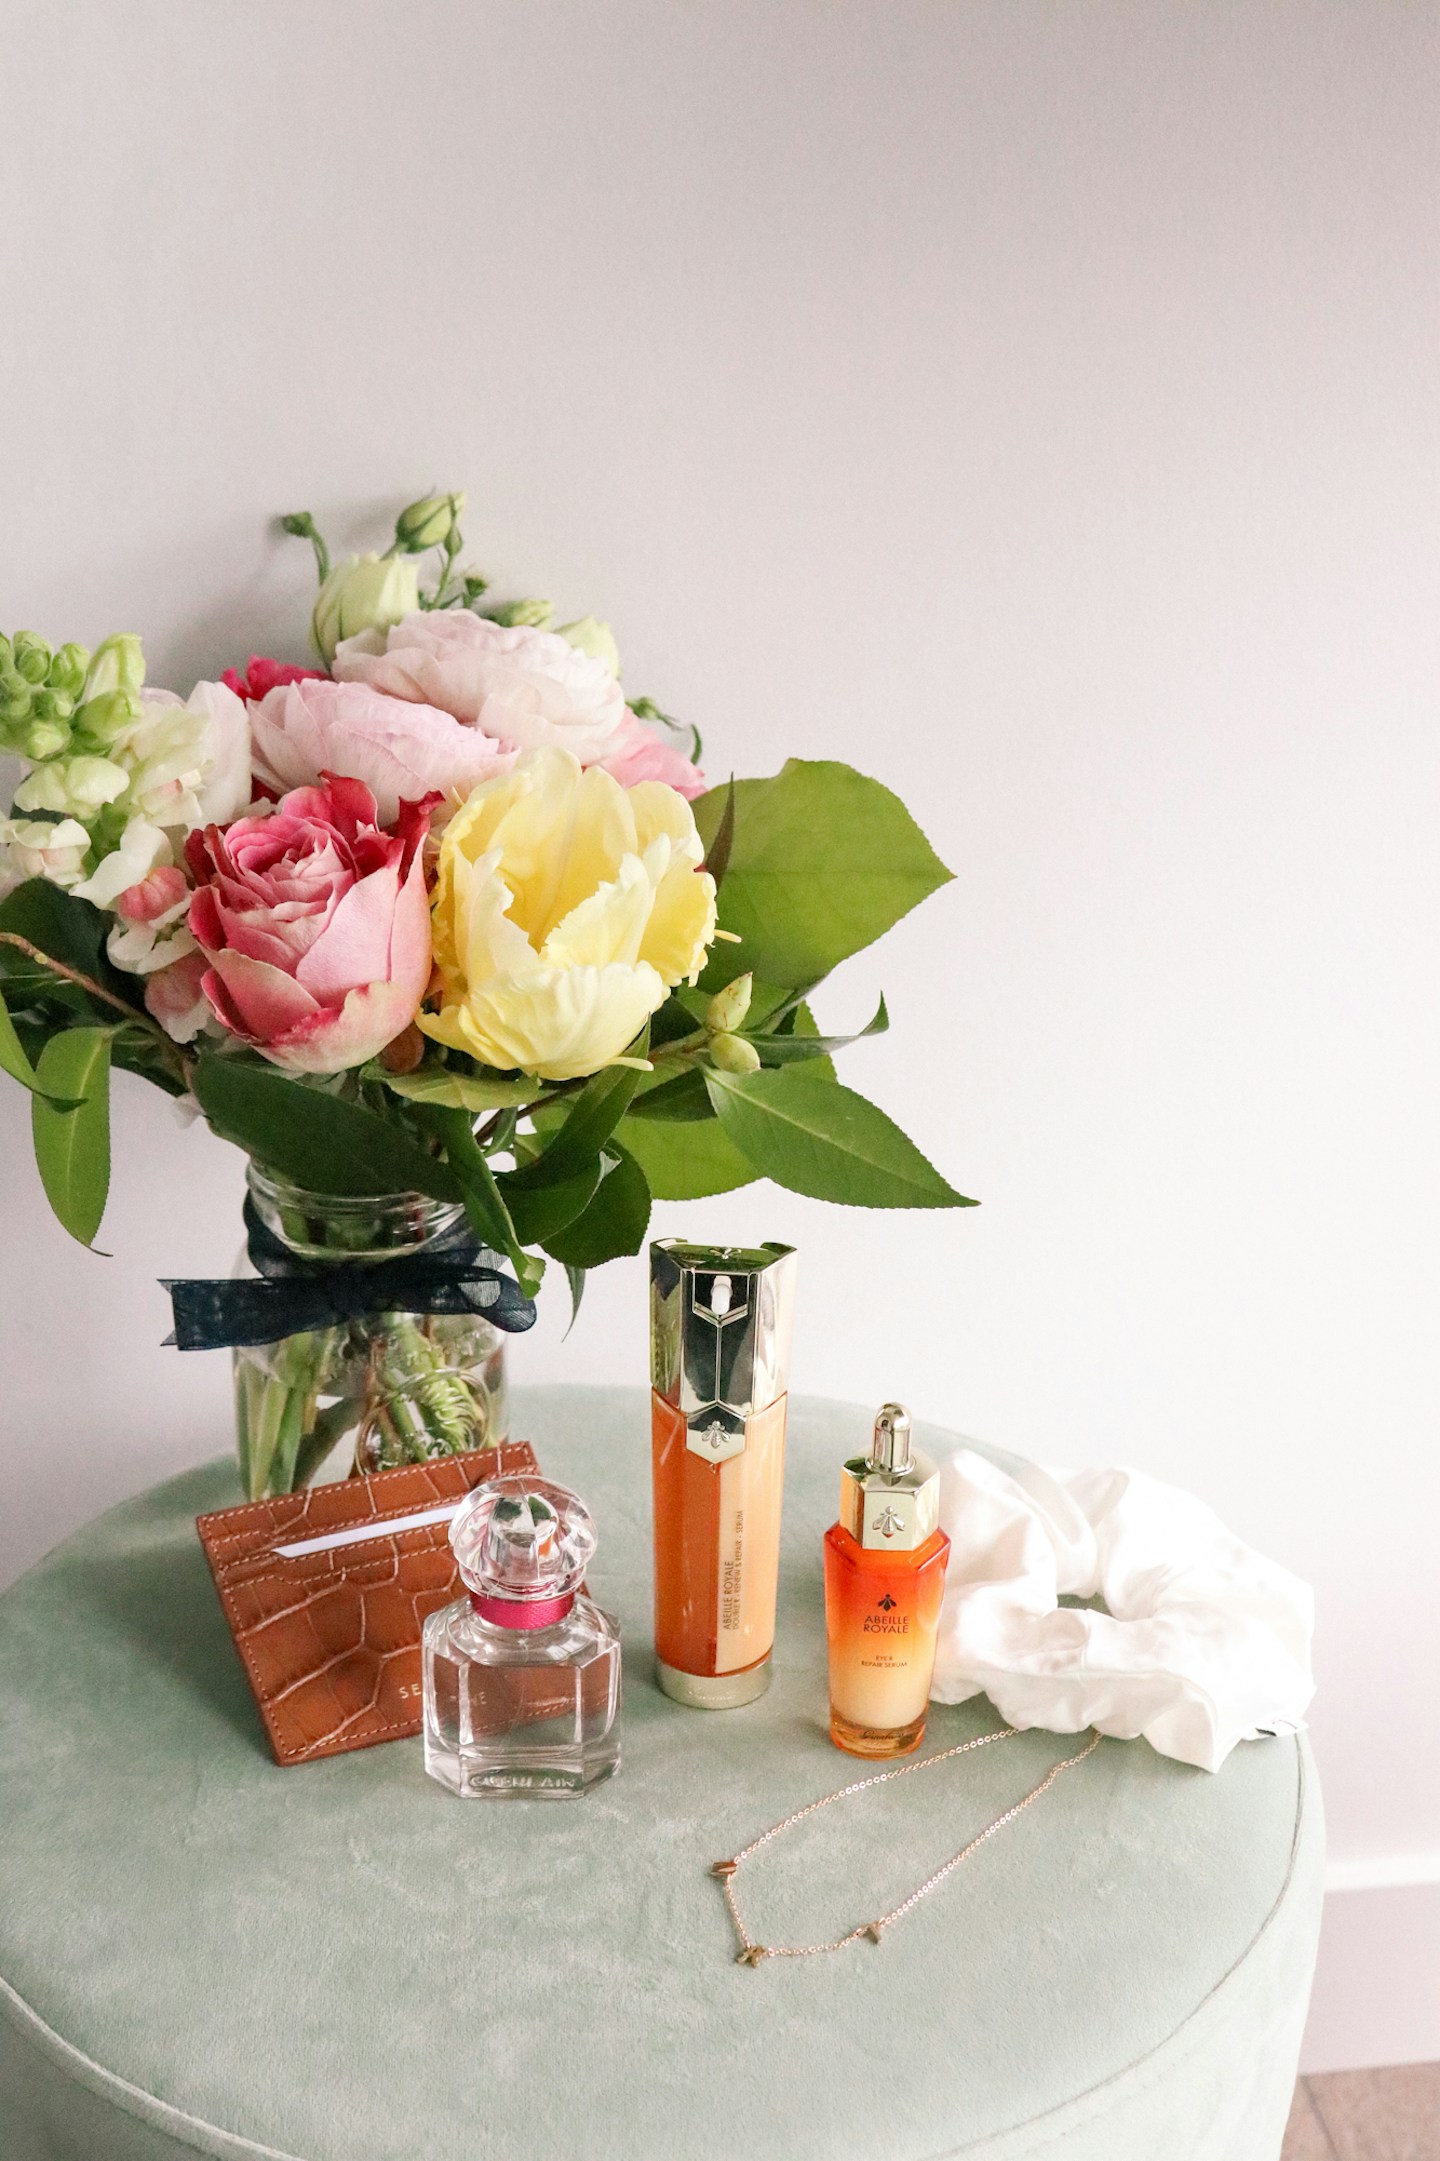 Mother's Day Gift Ideas 2021: From a new spa skincare routine to a floral perfume - I've rounded up some great gifting options for moms on mother's day.